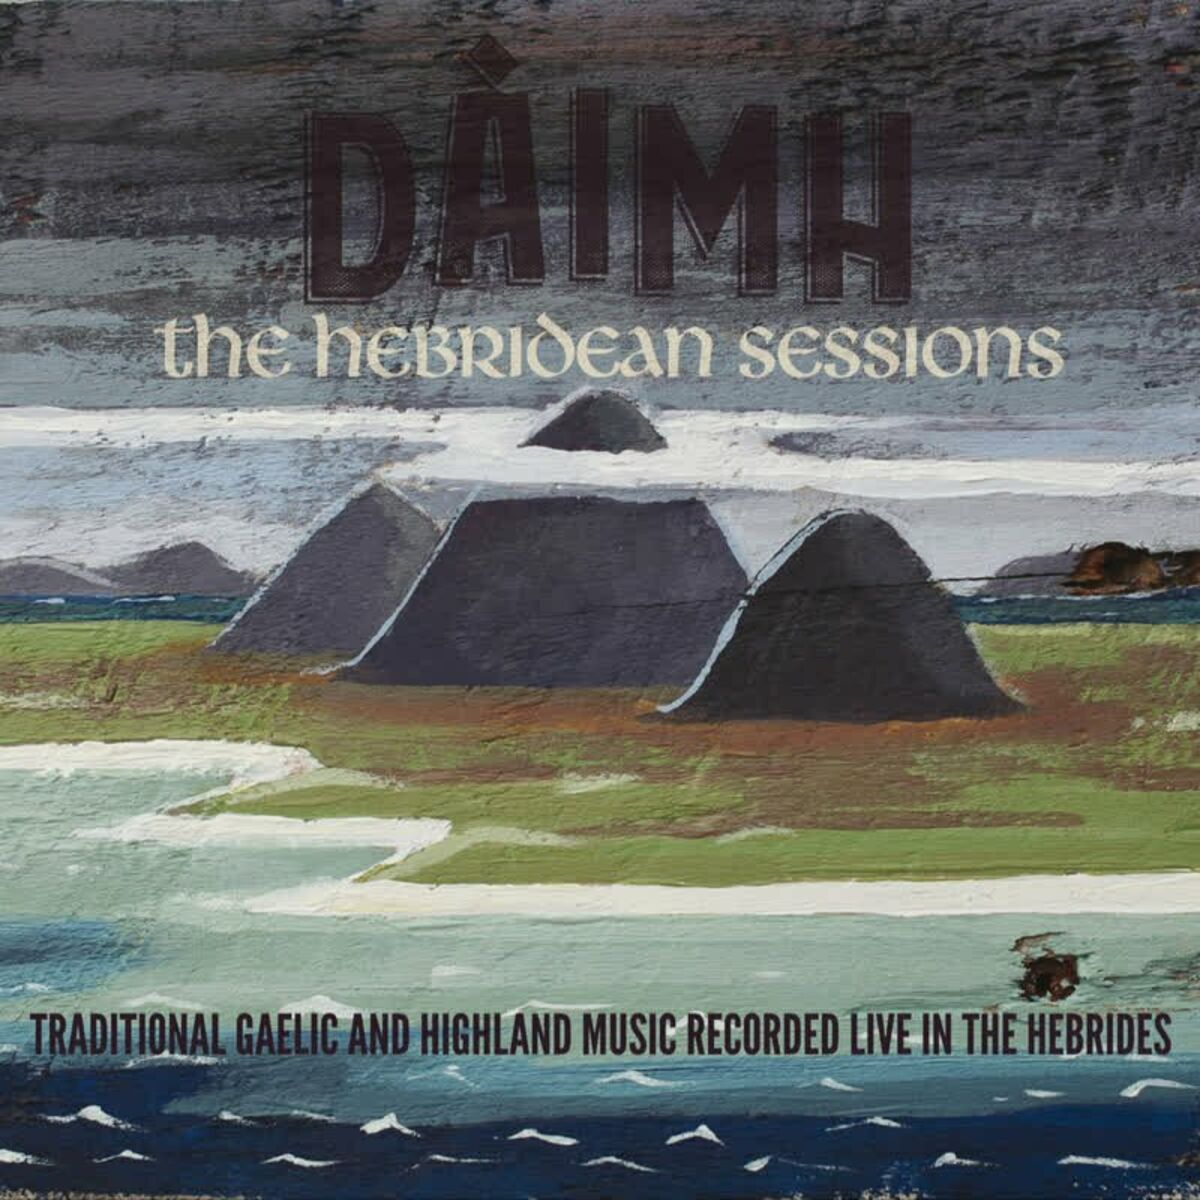 Daimh - 2015 - The Hebridean Sessions